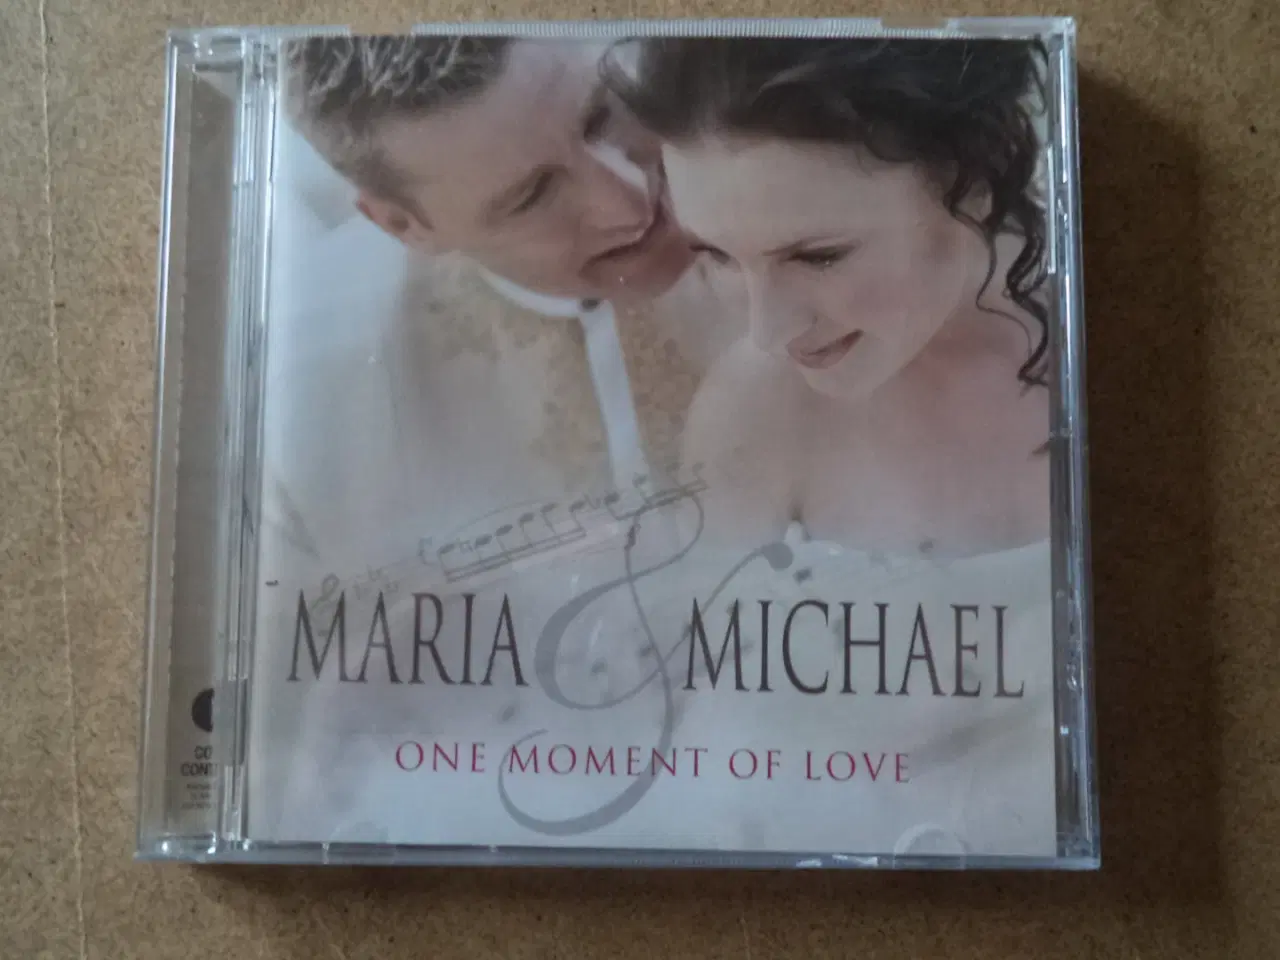 Billede 1 - Maria & Michael ** One Moment Of Love             